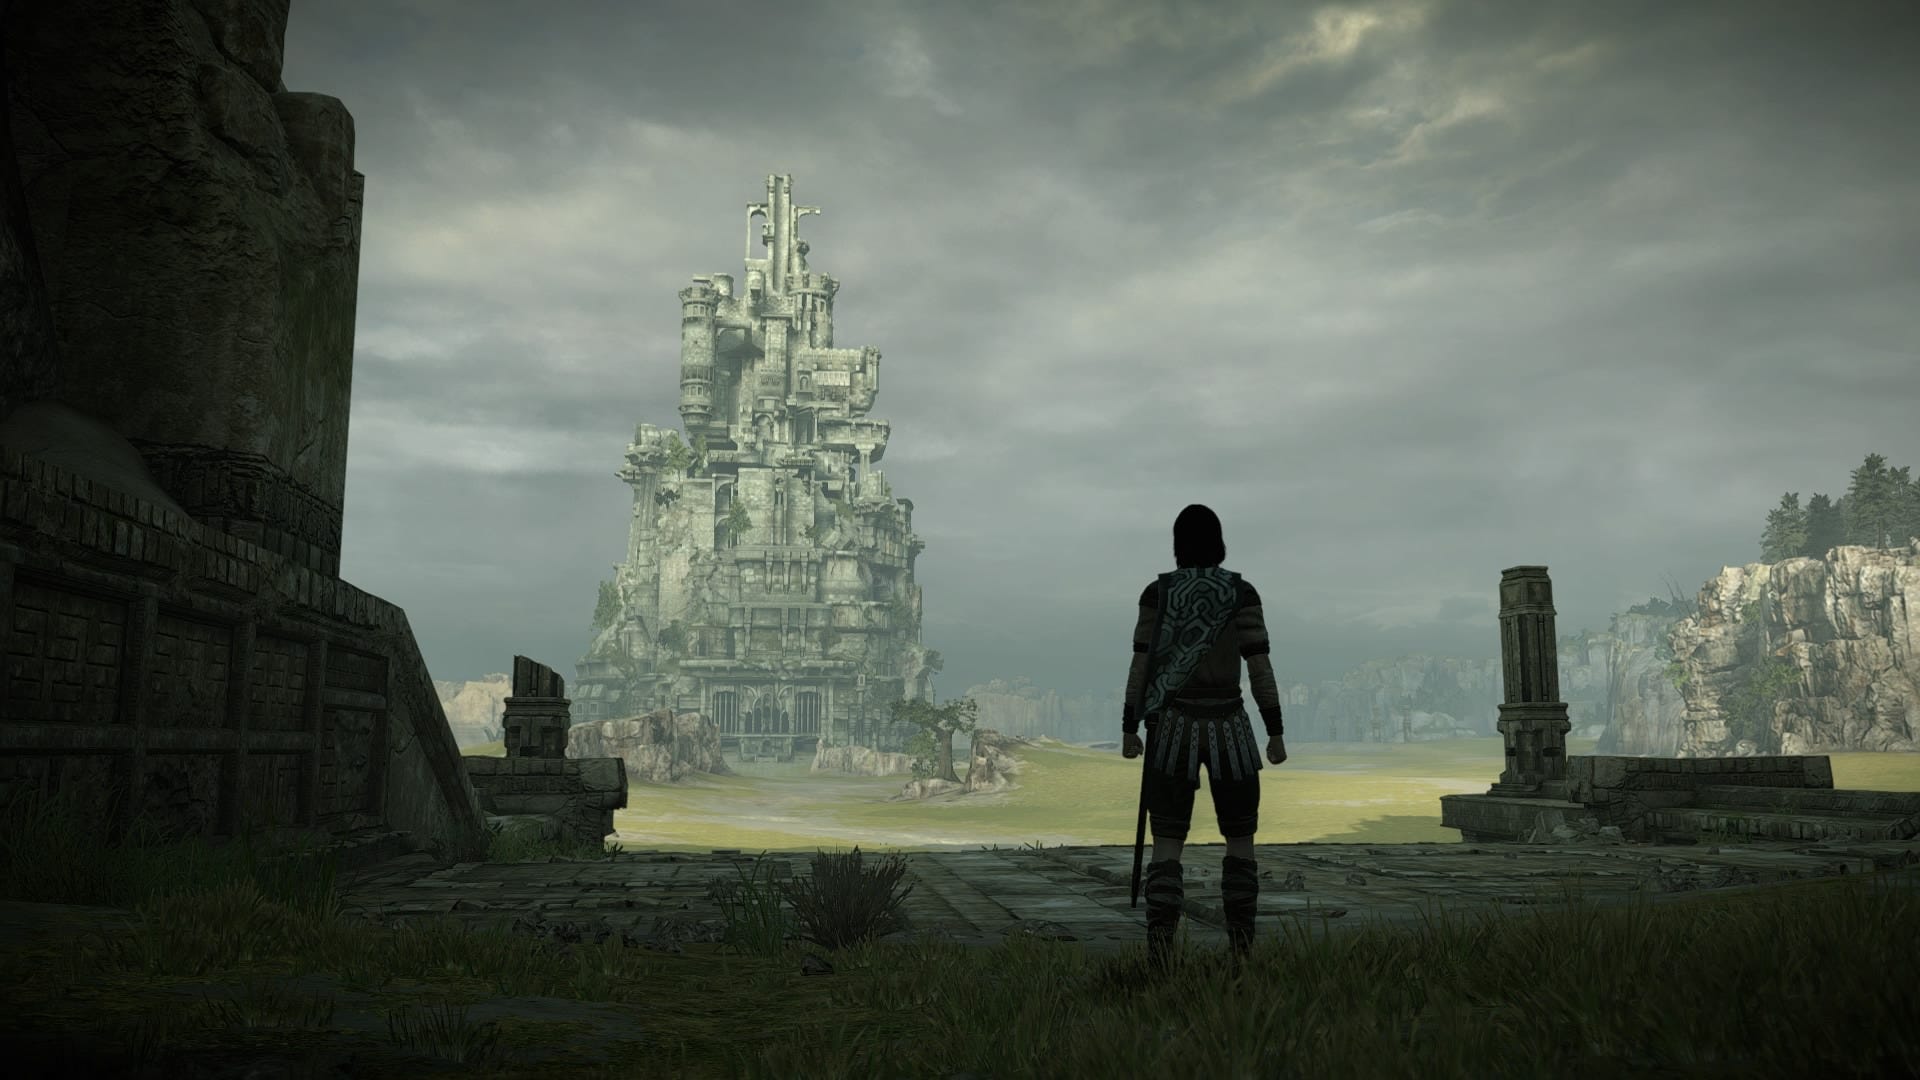 Shadow of the Colossus Review (PS4)